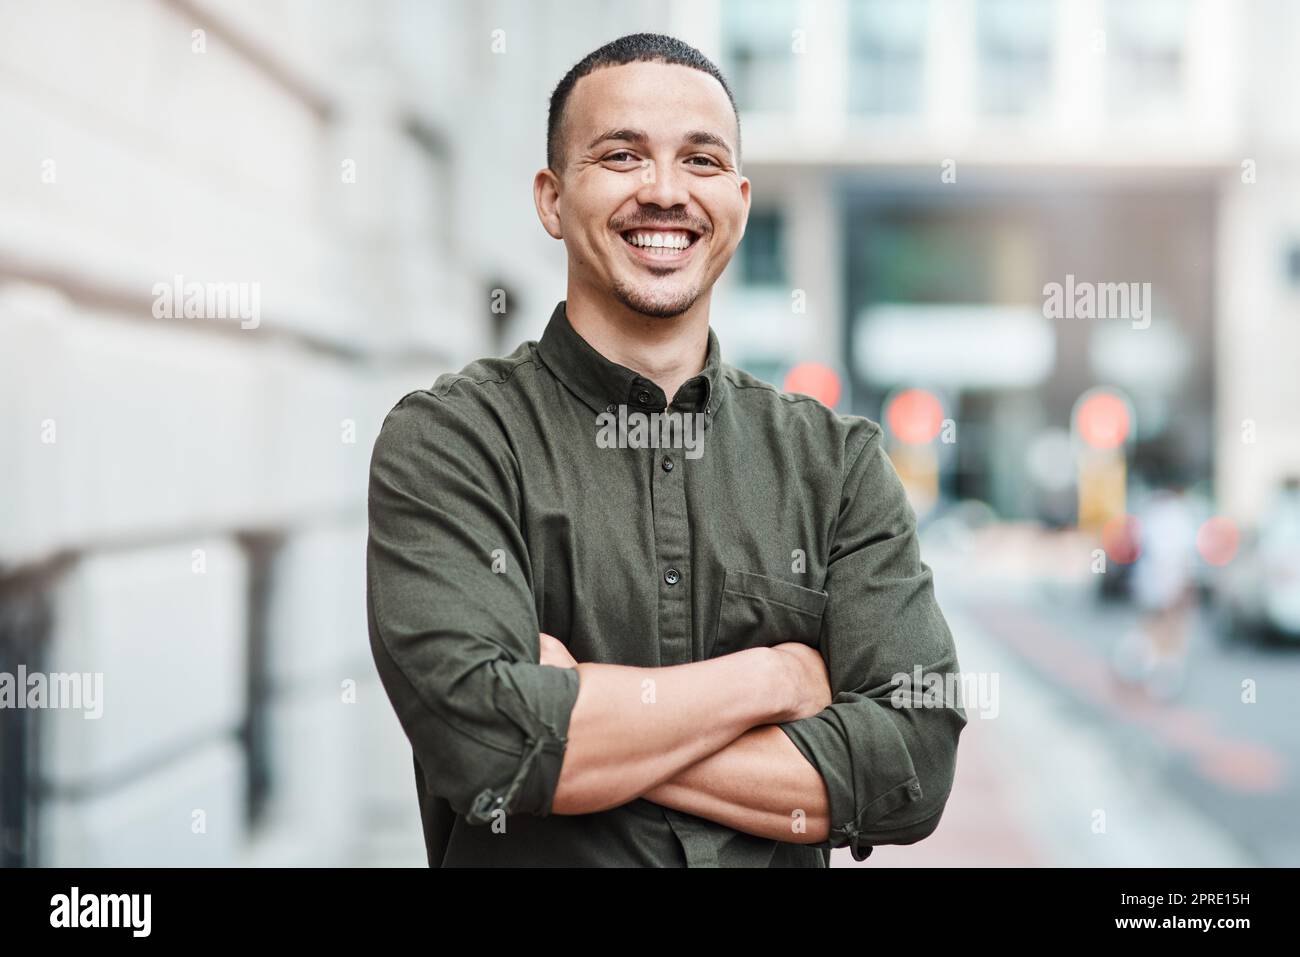 Business man standing with arms crossed, looking confident and proud in the city alone. Portrait of a black male entrepreneur or worker showing vision, ambition and success with arms folded downtown Stock Photo